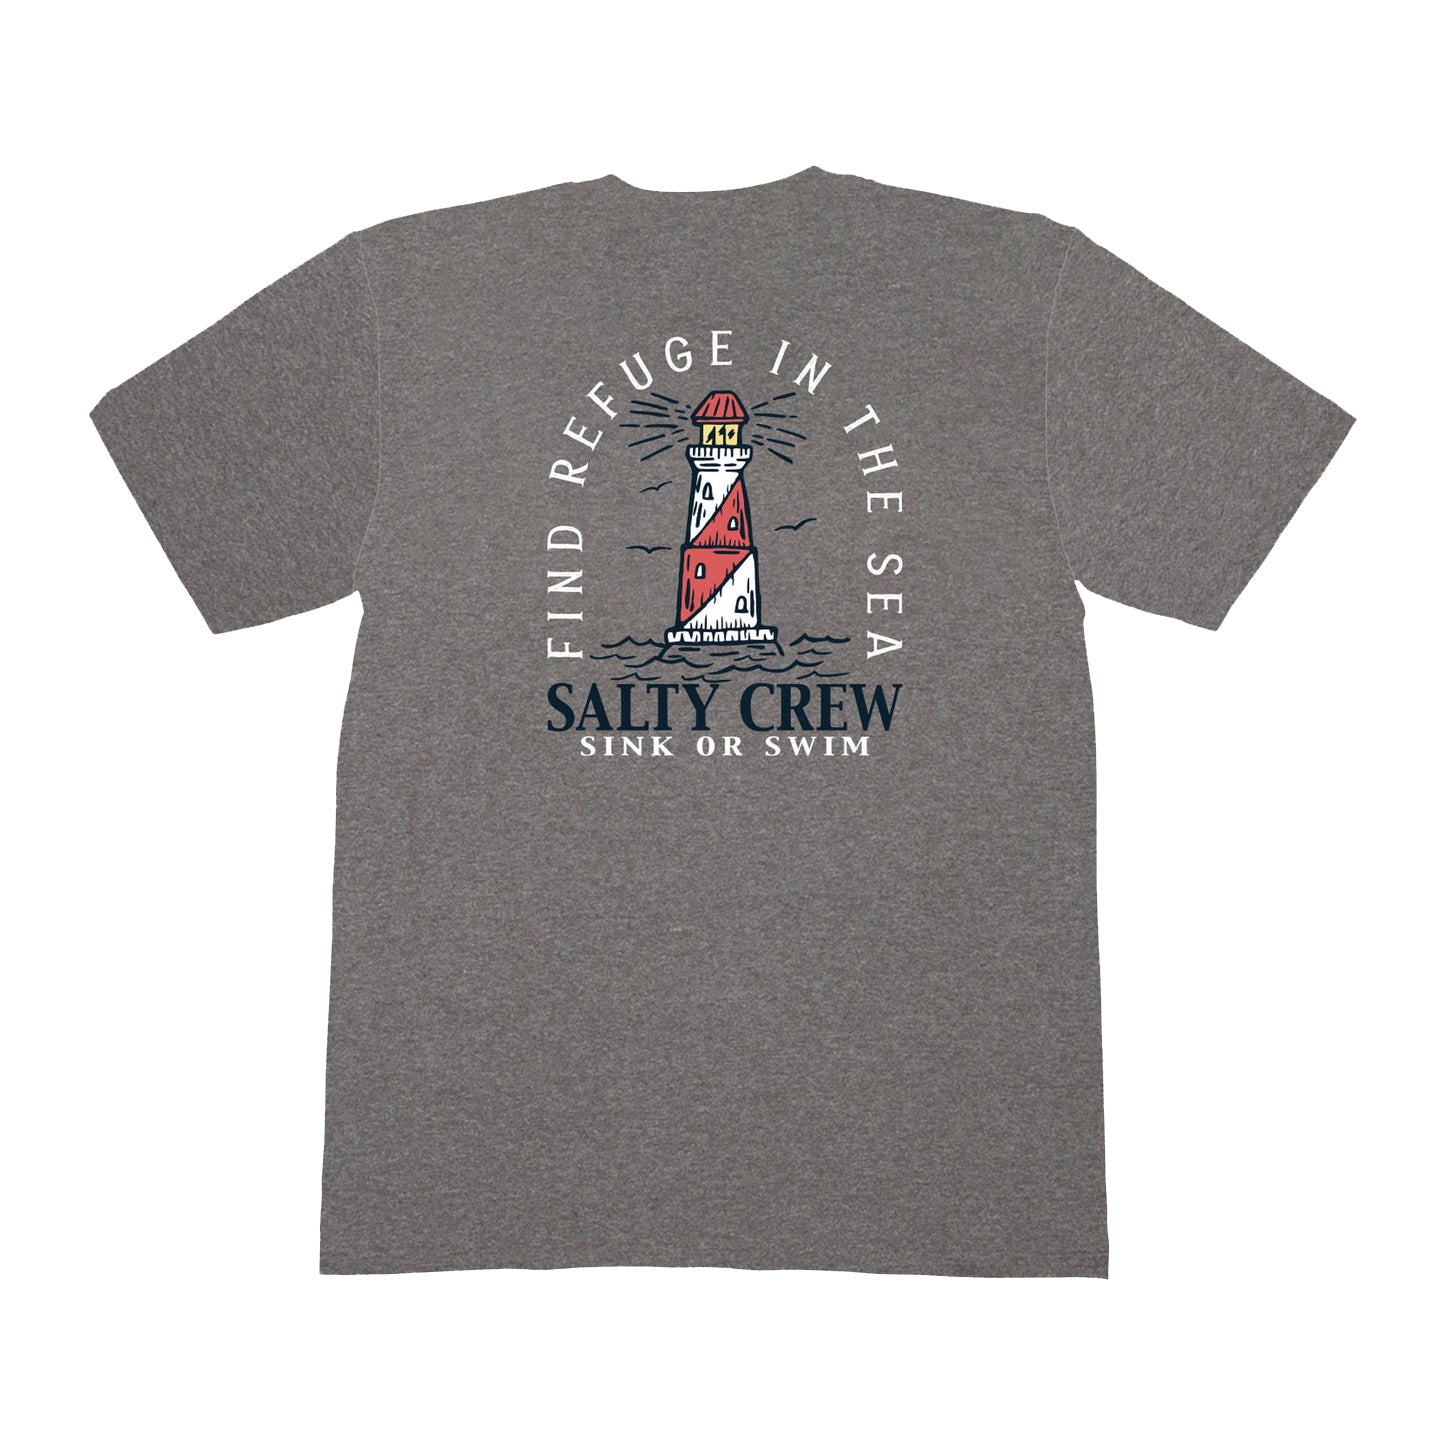 Salty Crew Boys Outerbanks SS Tee AthleticHeather S